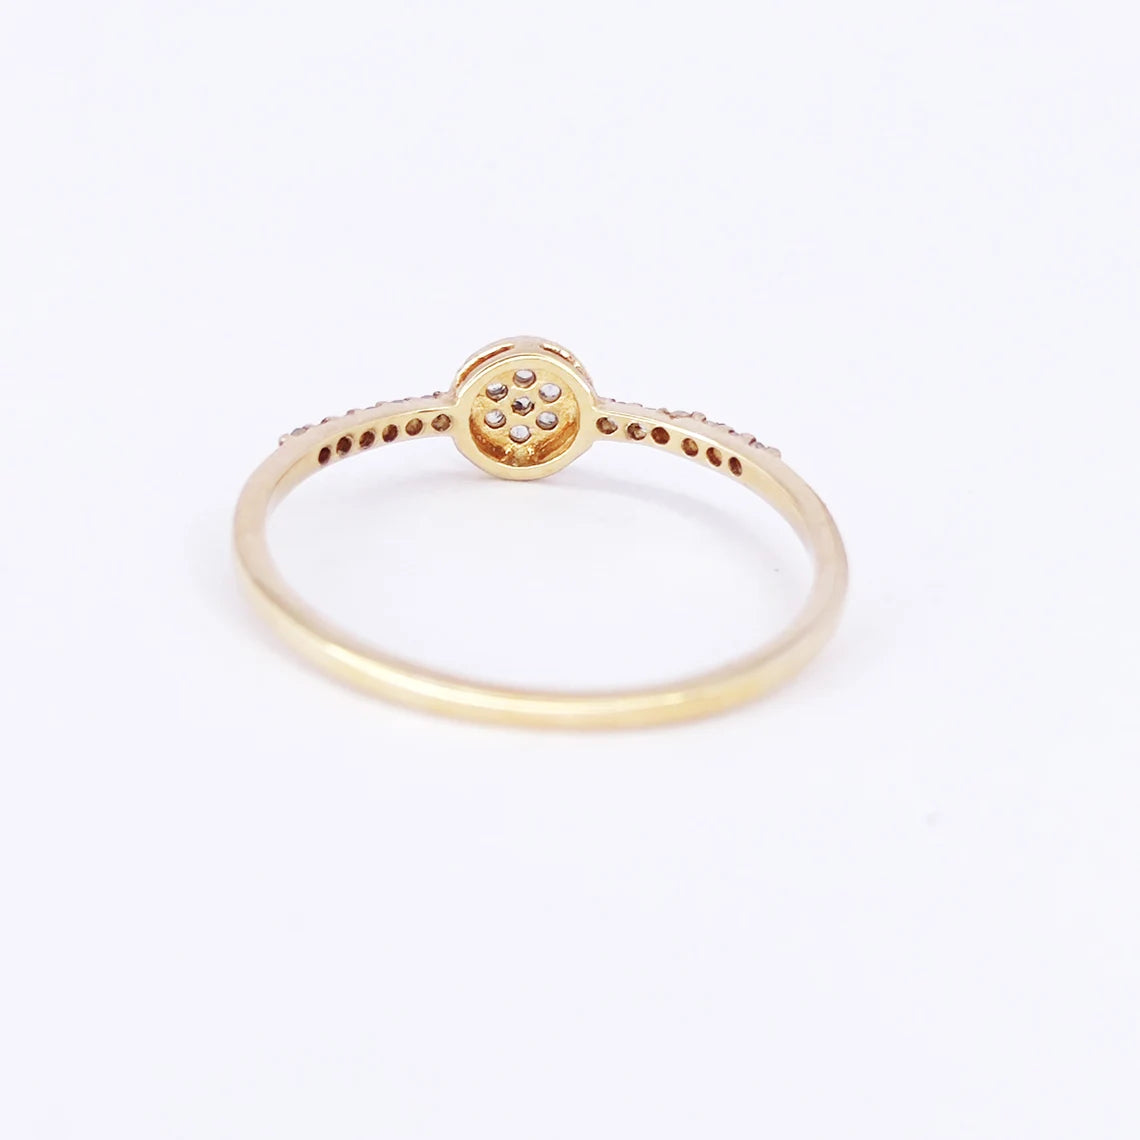 Minimalist Ring 14k Solid Gold / Diamond Ring / Thin Gold Stacking Rings / Promise Ring / Labor Day Sale